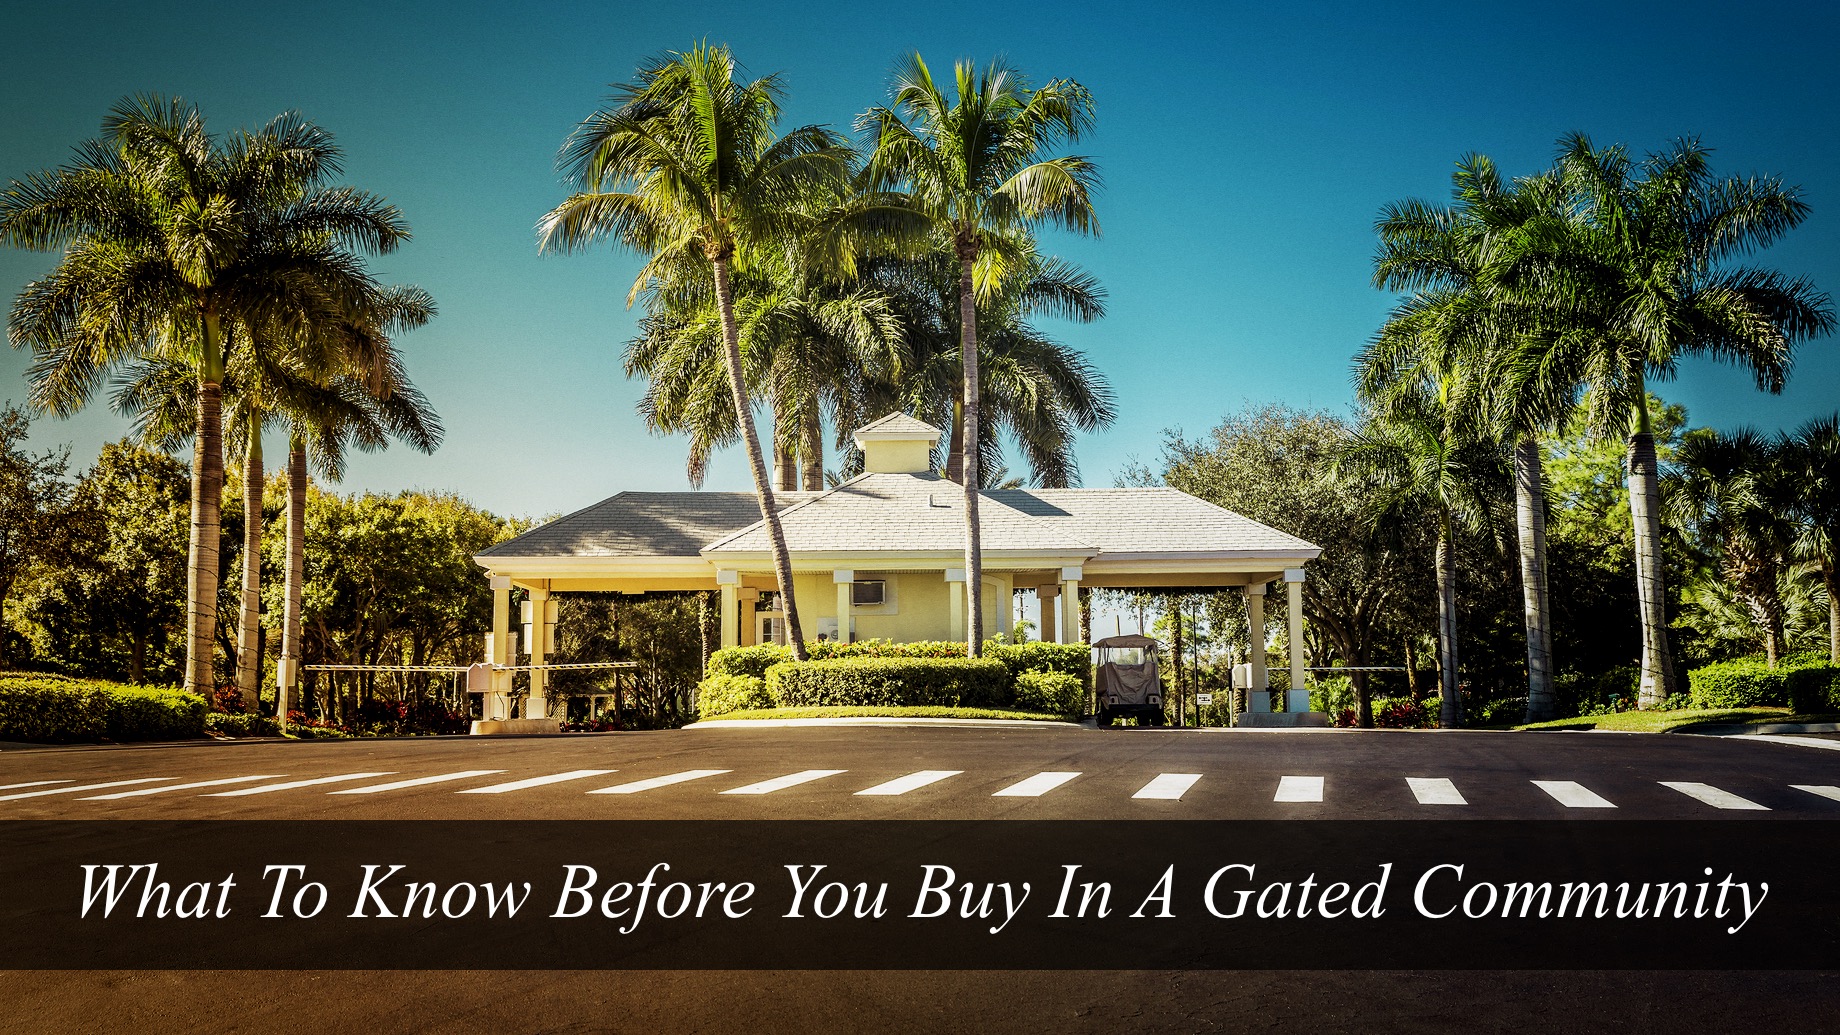 What To Know Before You Buy In A Gated Community